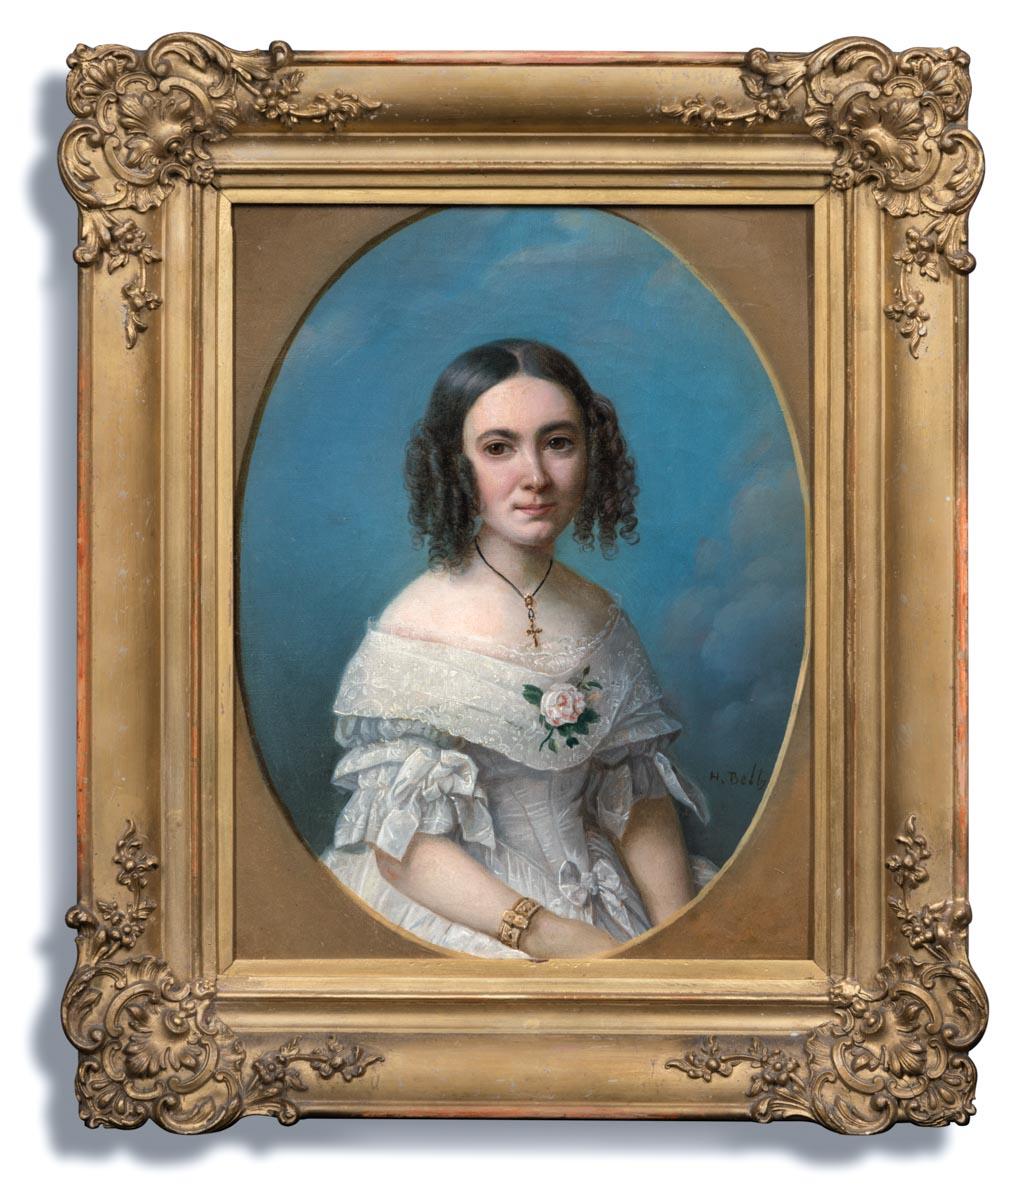 Heinrich Beltz Portrait Painting - Signed Portrait of a Young Lady in a White Dress 1840’s, Oil Painting on canvas